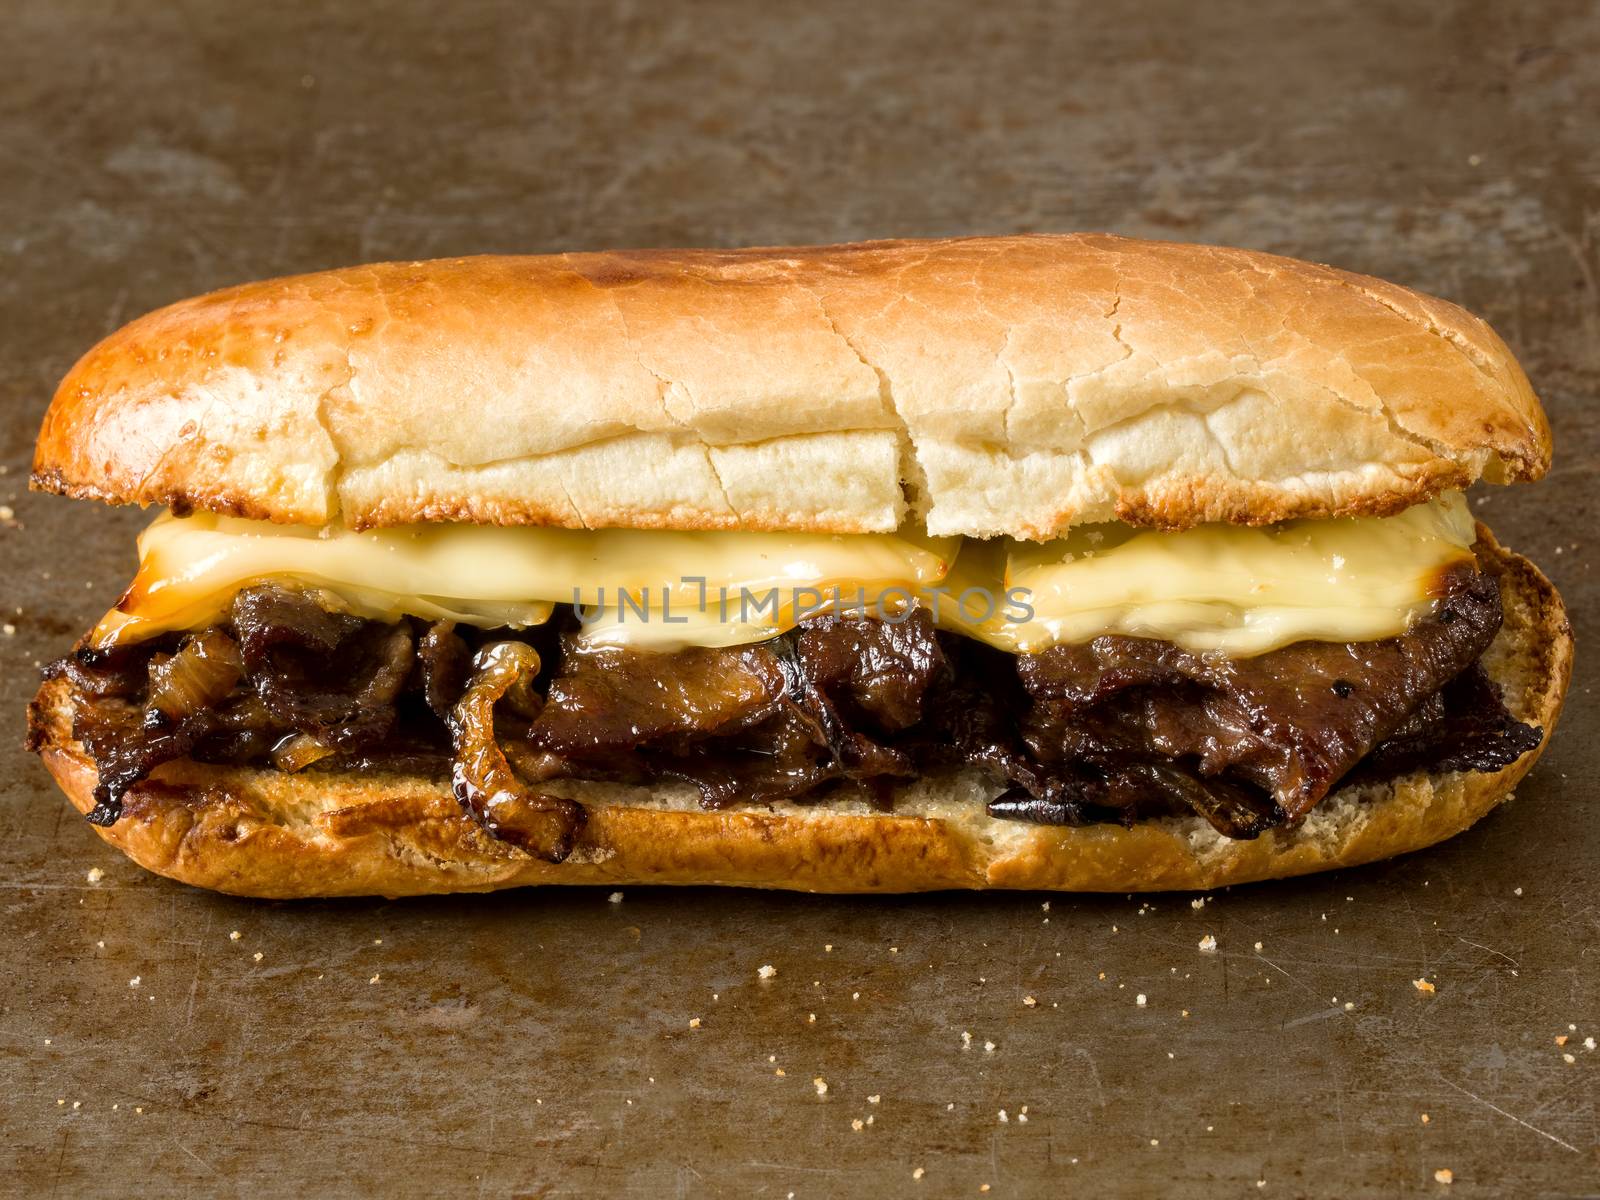 rustic philly cheese steak sandwich by zkruger